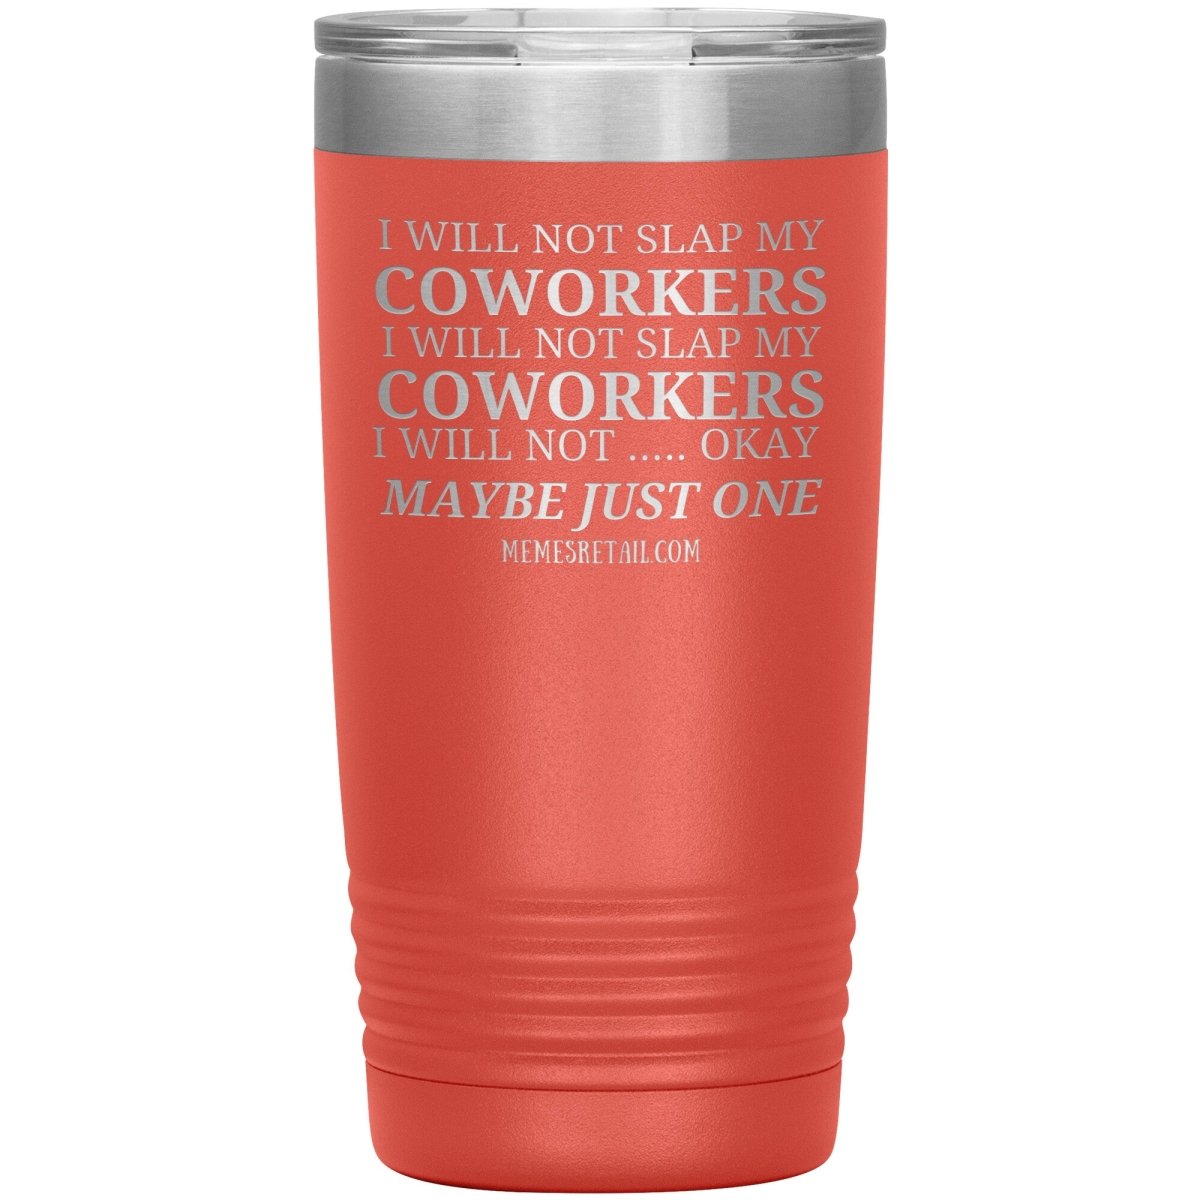 I will not slap my coworker… Tumblers, 20oz Insulated Tumbler / Coral - MemesRetail.com